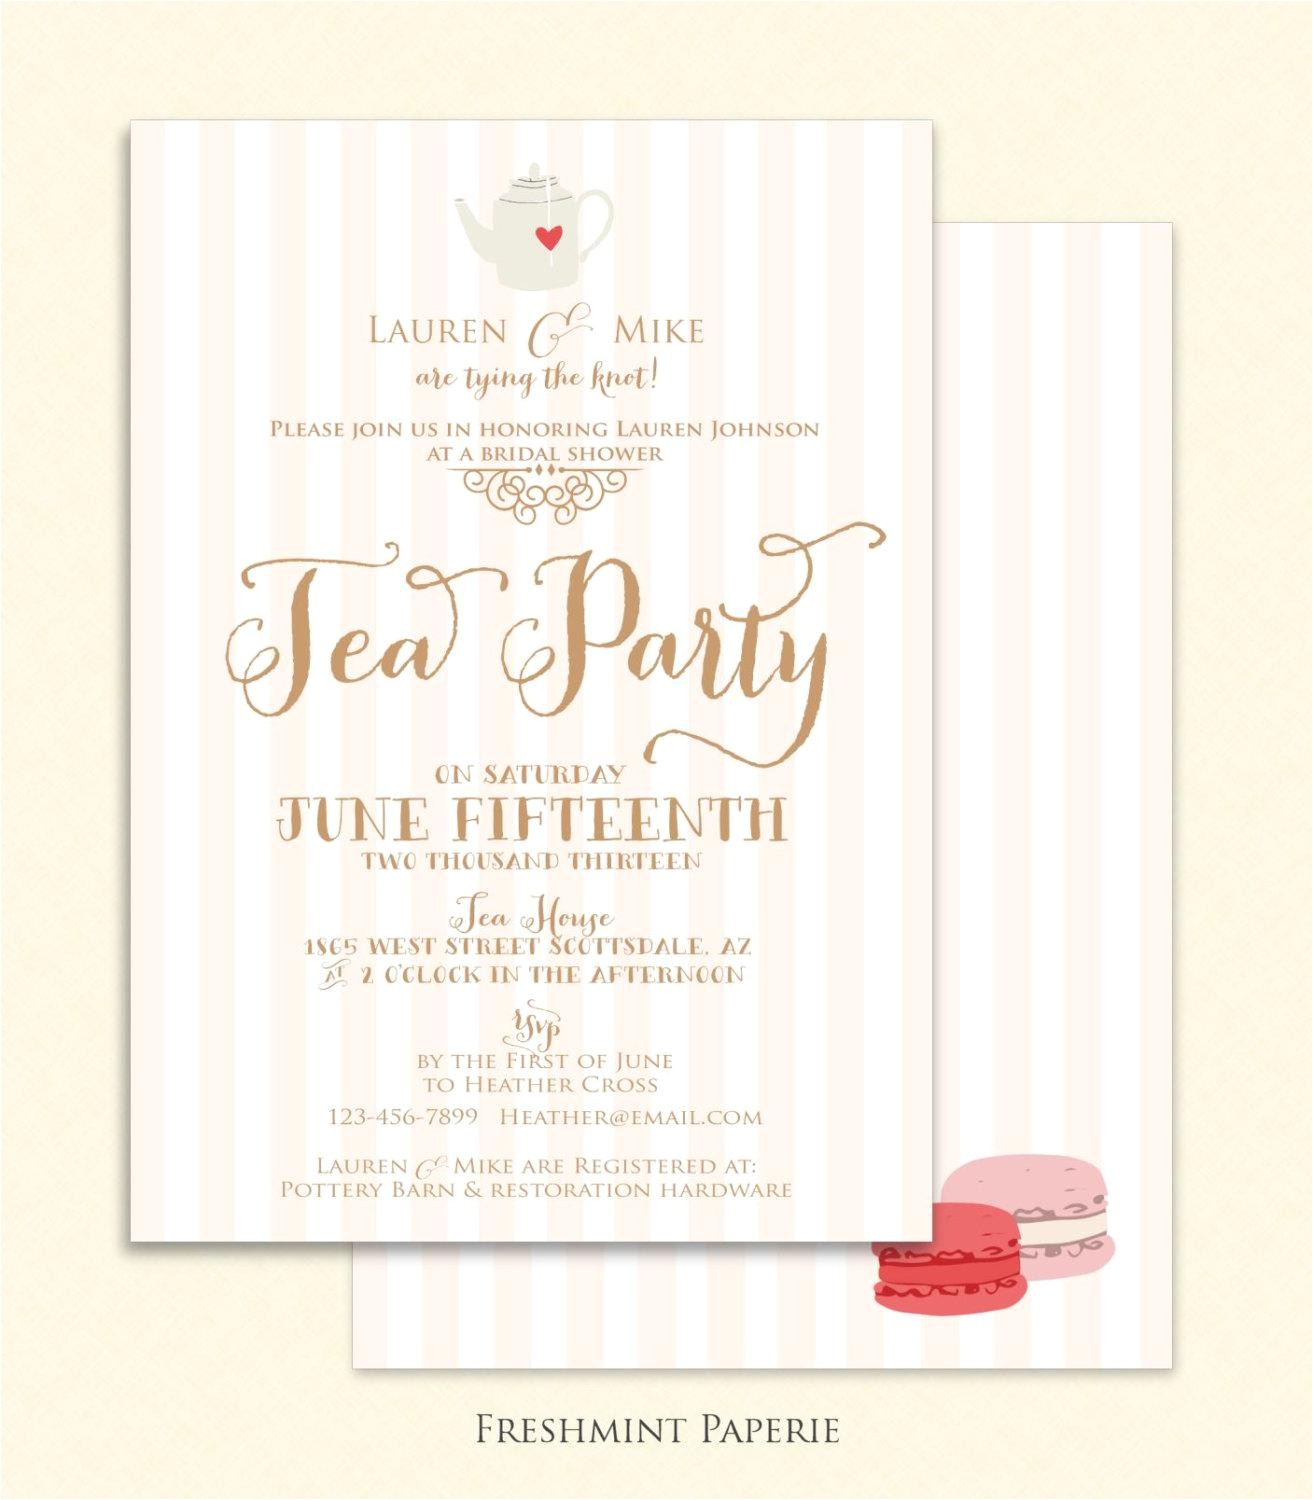 Tea Party themed Bridal Shower Invitations Bridal Shower Tea Party Invitations Party Invitations